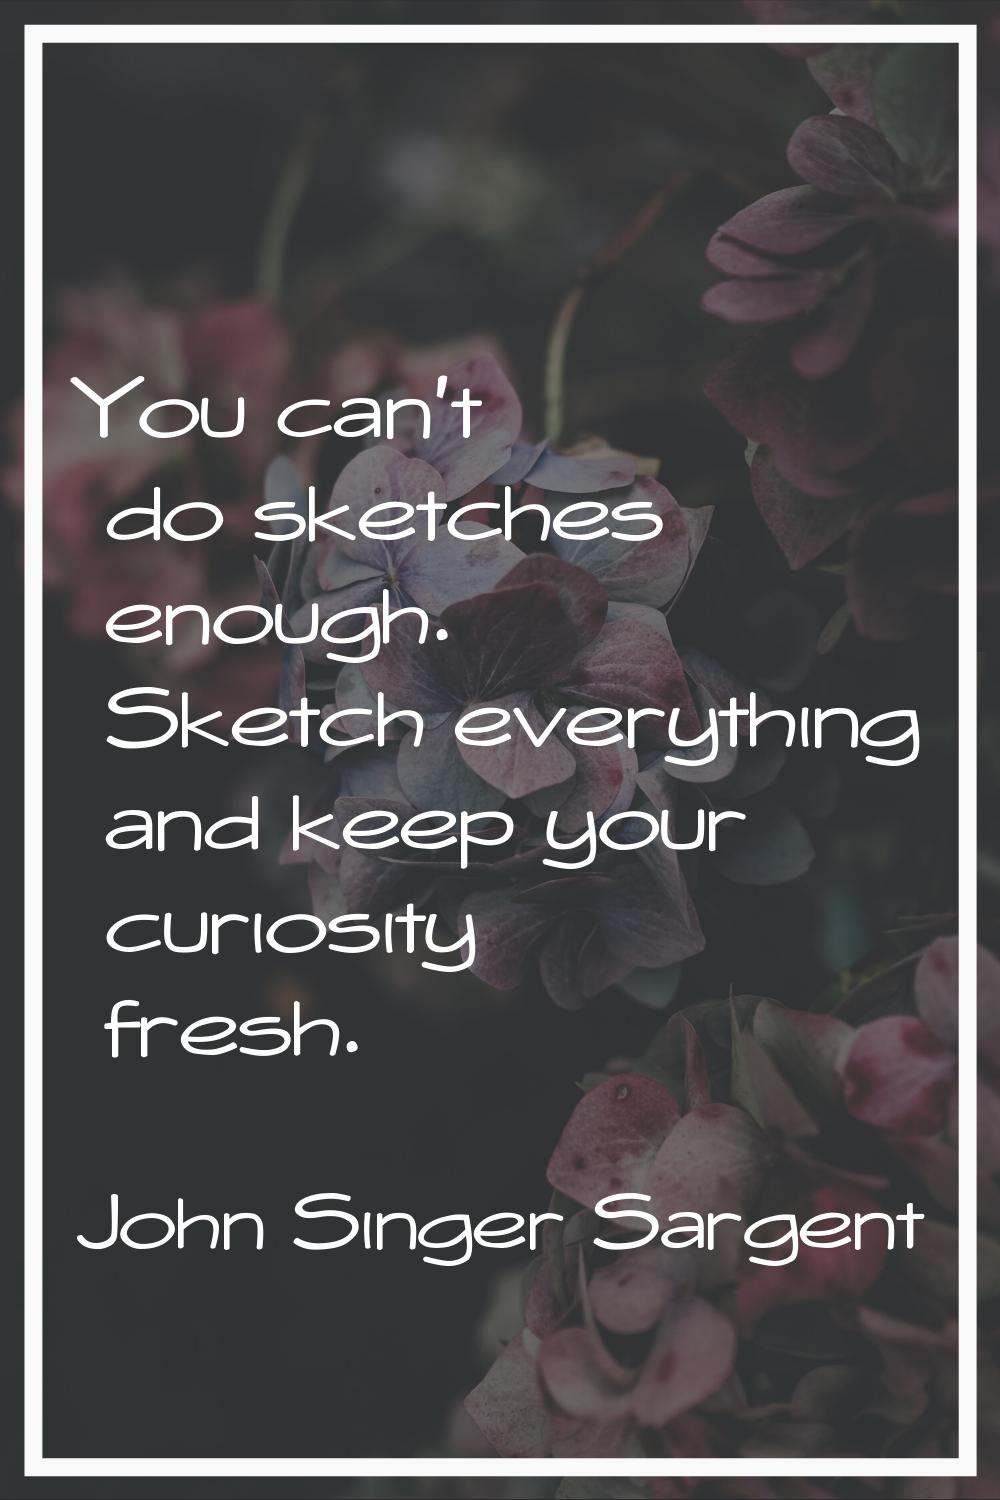 You can't do sketches enough. Sketch everything and keep your curiosity fresh.